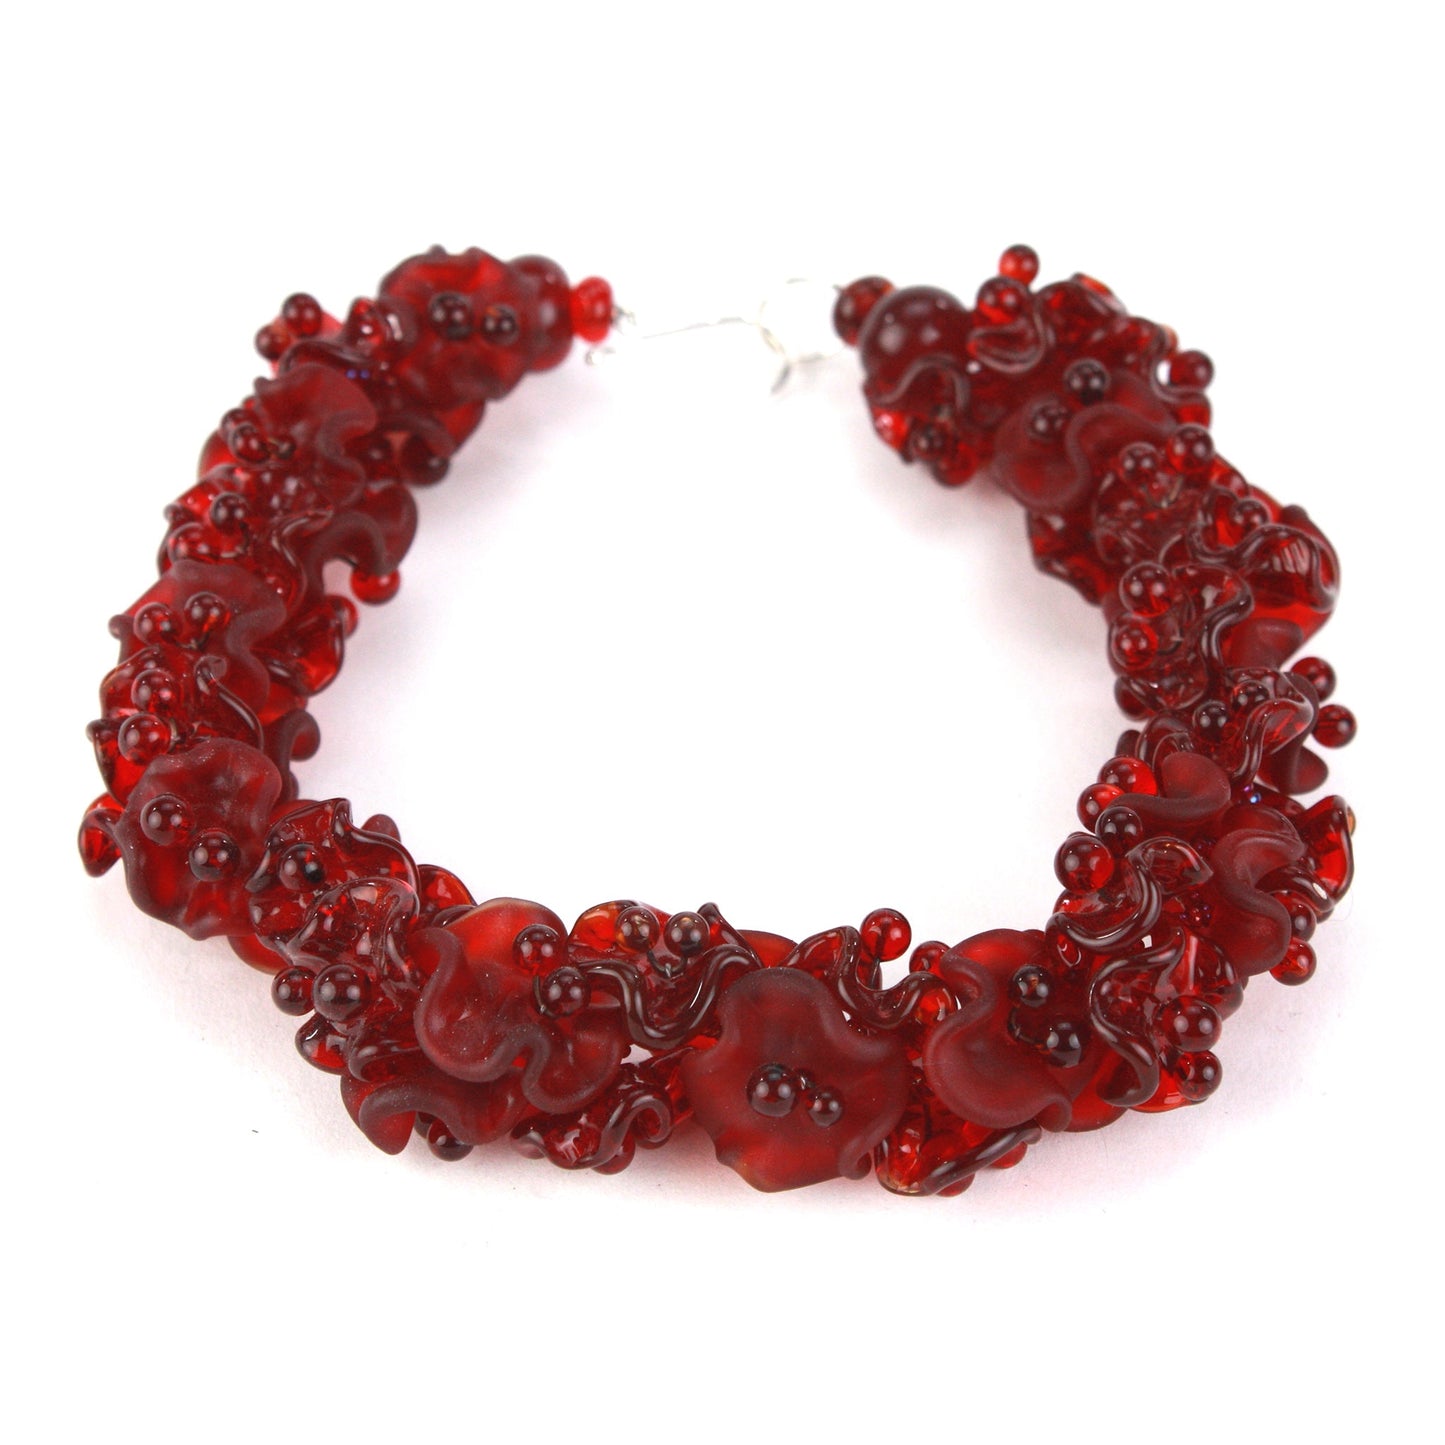 Florette necklace in red